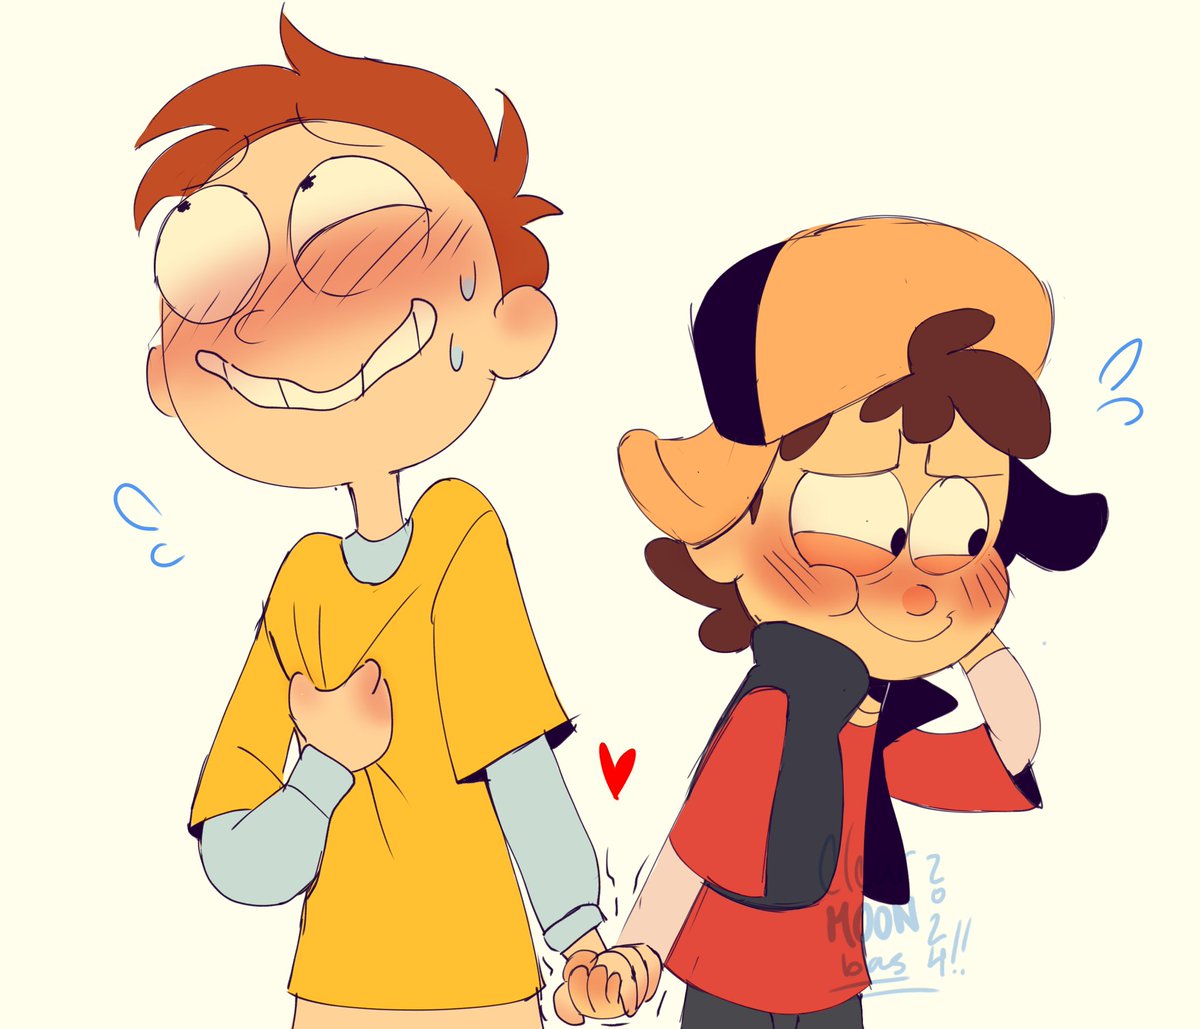 Gays gays homosexuales gays

#mortyxdipper #gravityfalls #rickandmorty